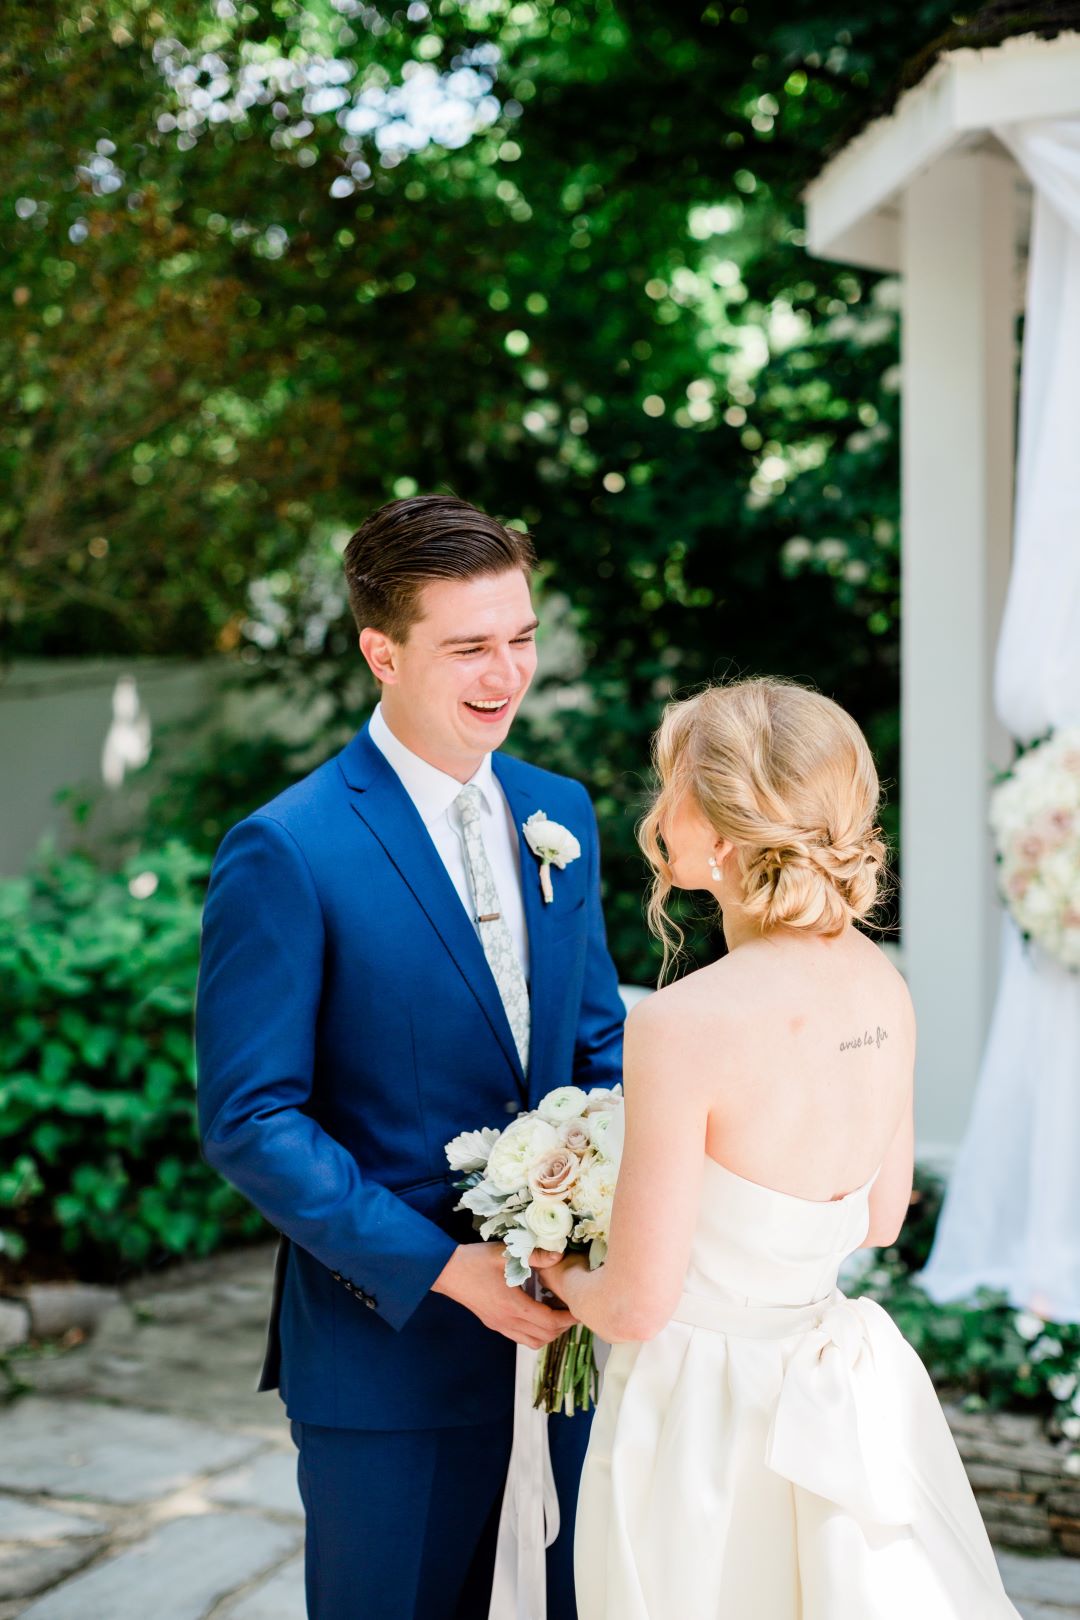 CJ's Off The Square | Bride and groom smiling at each other during their first look